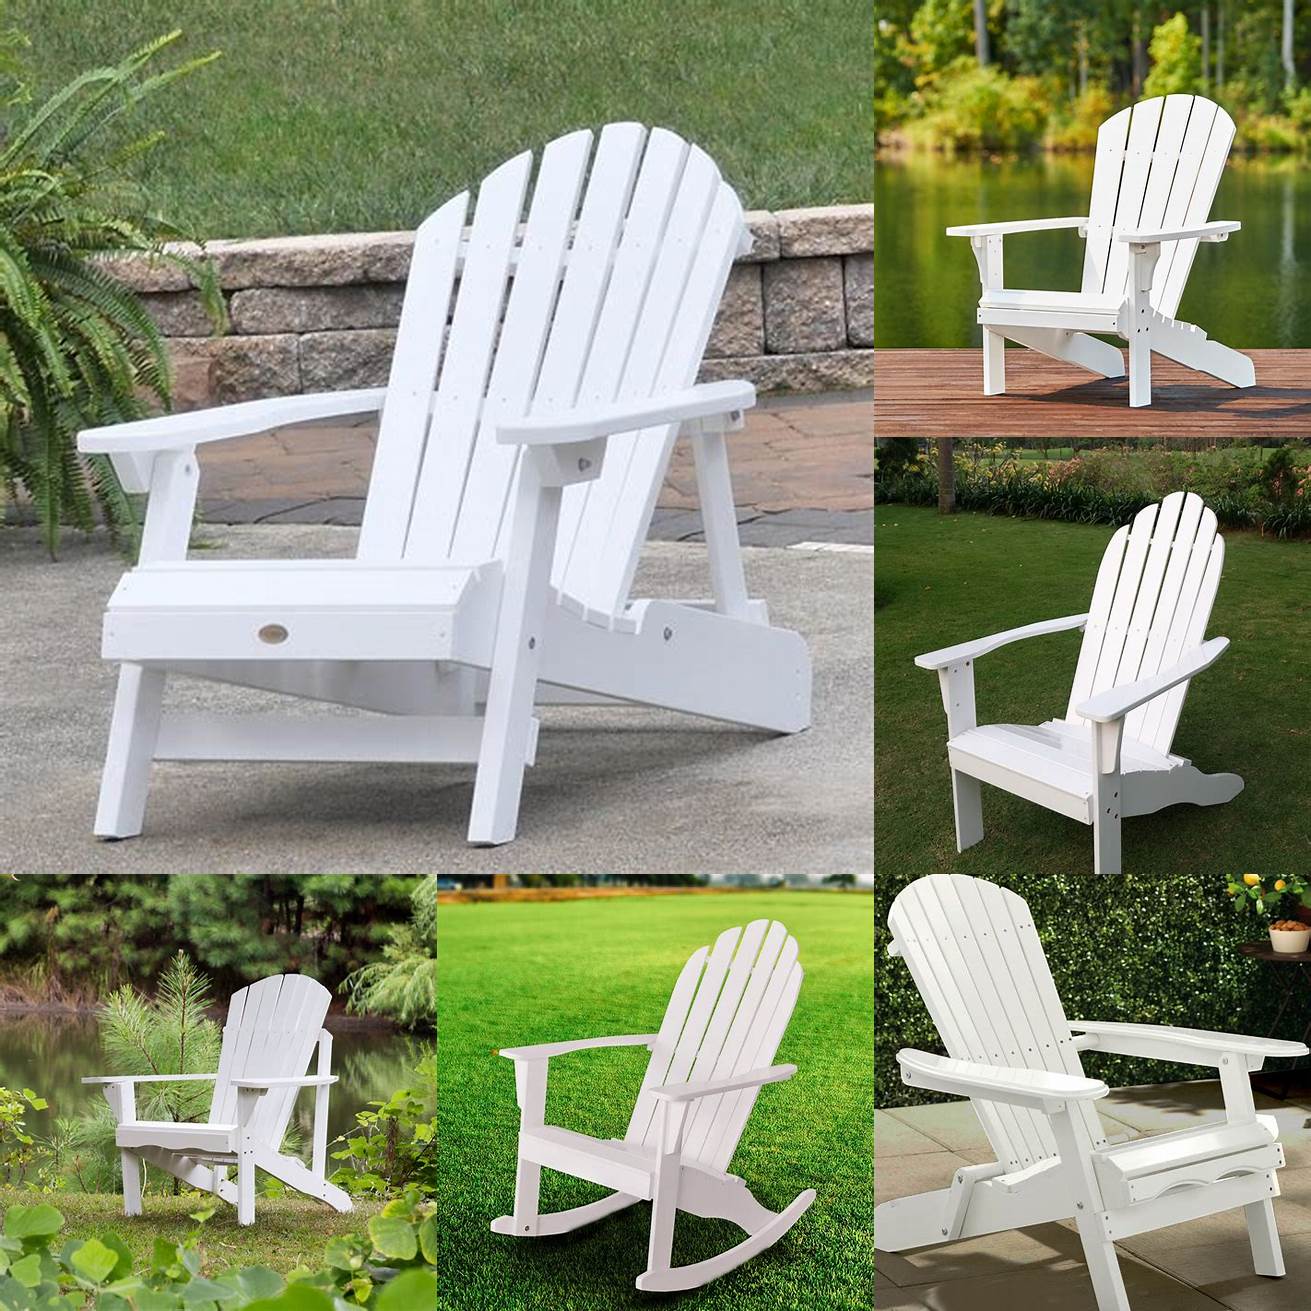 Versatile - White Adirondack chairs can be dressed up or down depending on your preference Add colorful cushions or blankets for a pop of color or keep them simple and elegant on their own